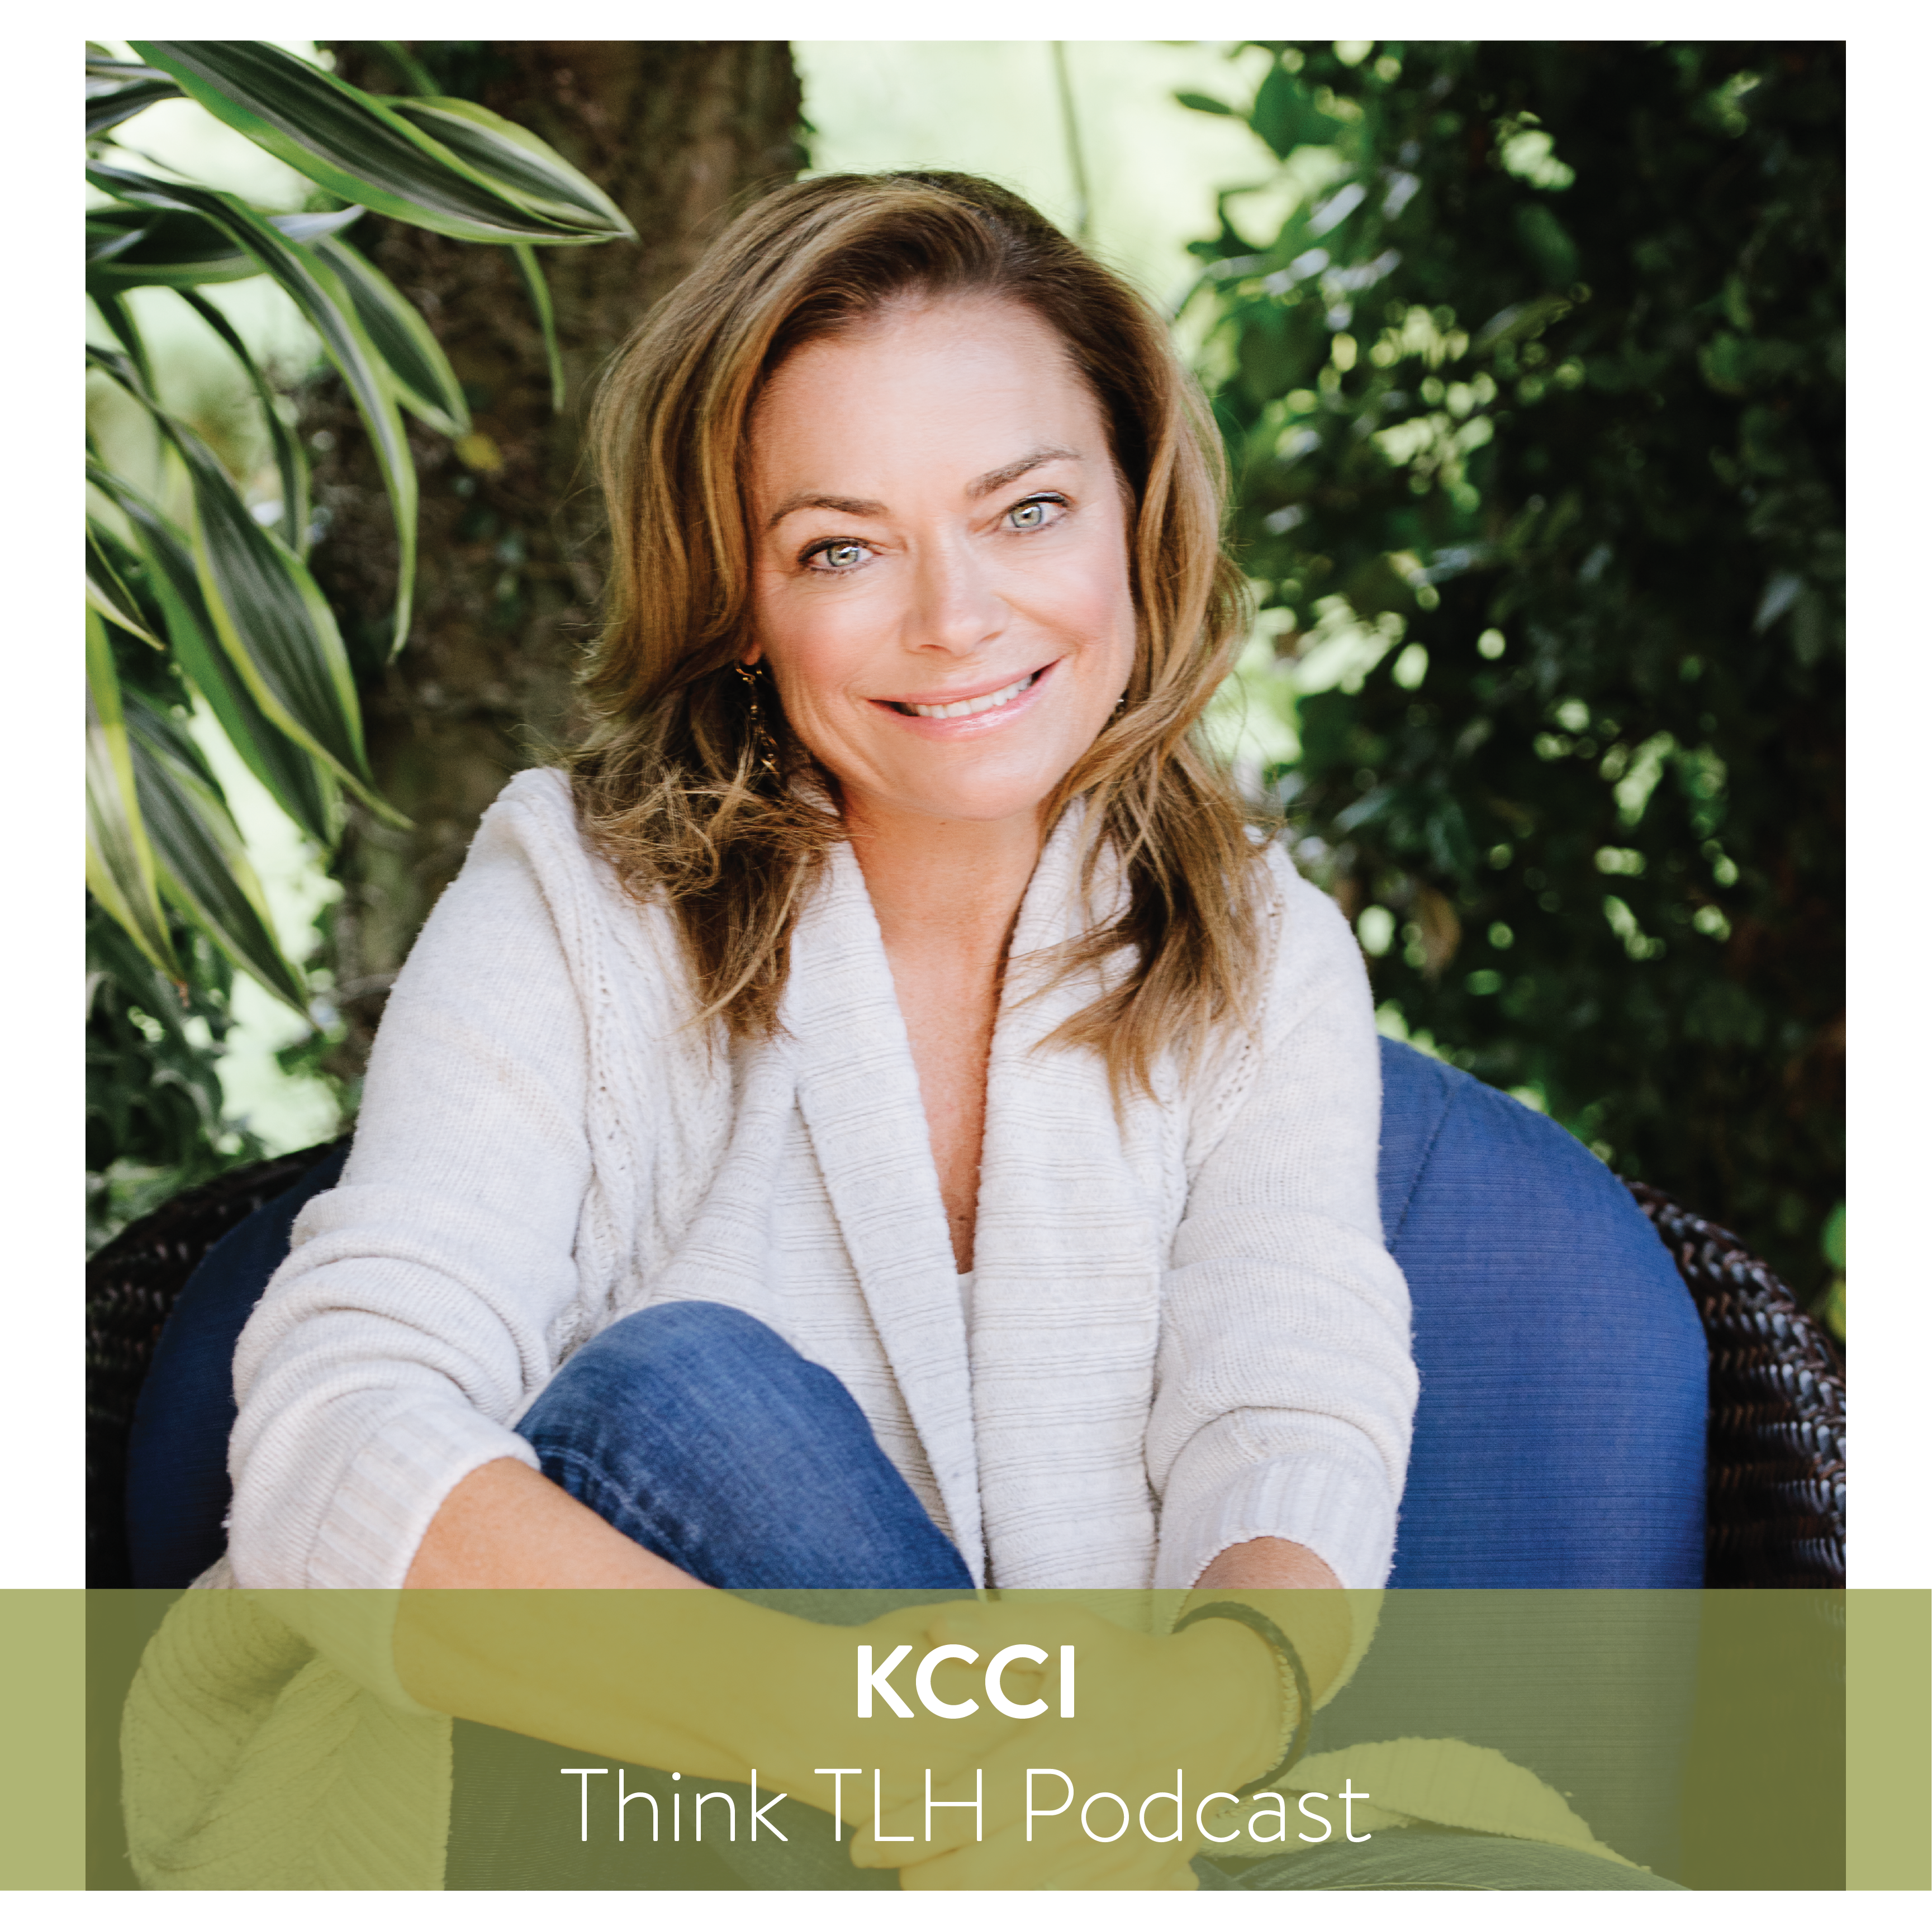 KCCI Think TLH Podcast with Susie Busch Transou | Tallahassee Podcast